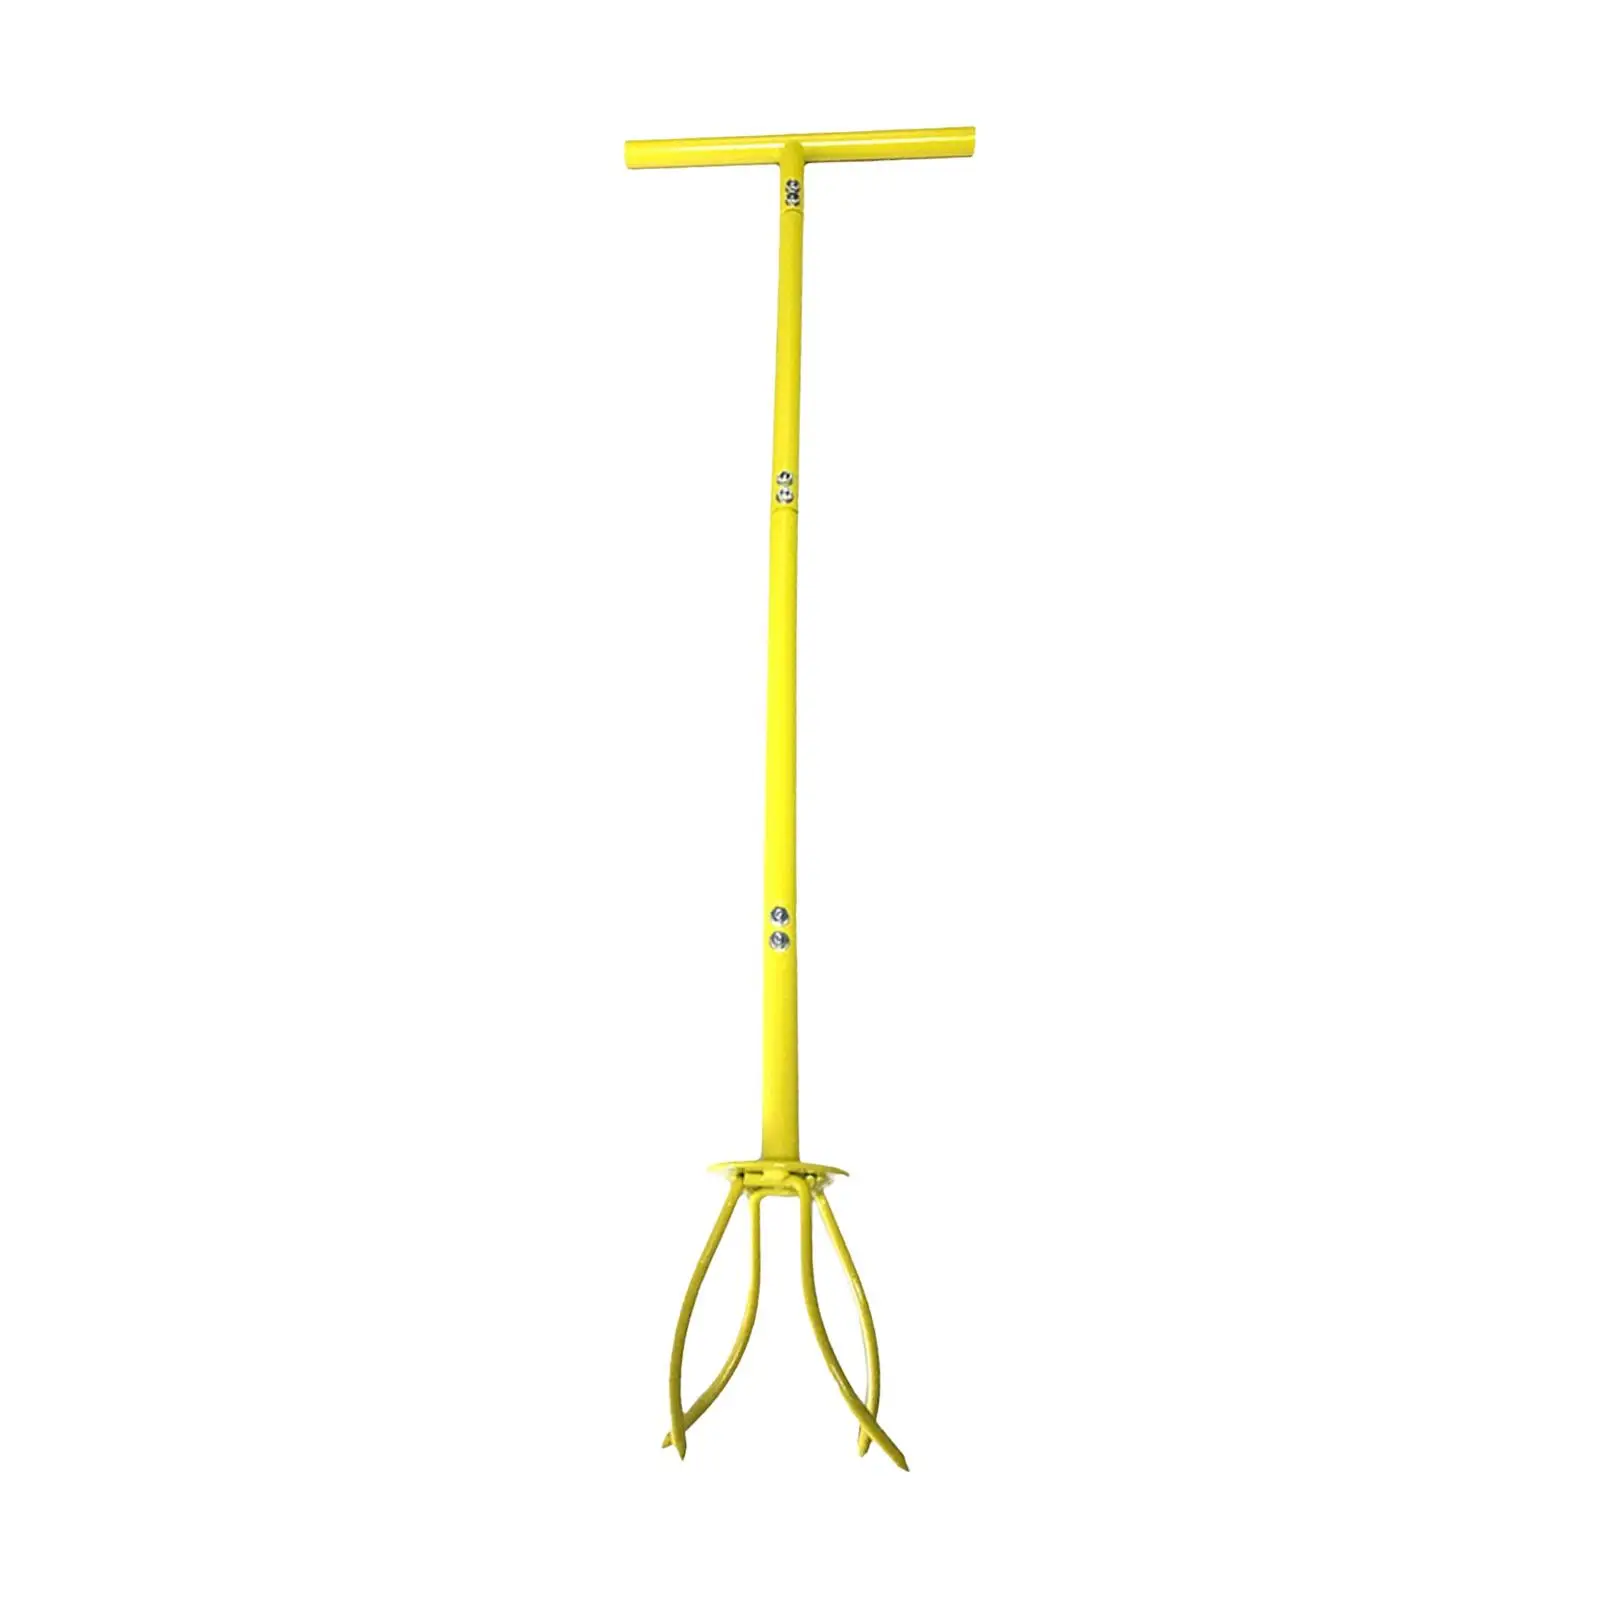 Manual Hand Tiller Heavy Duty No Bending for Narrow and Wide Areas Detachable with Adjustable Shaft Gardening Hand Twist Tiller